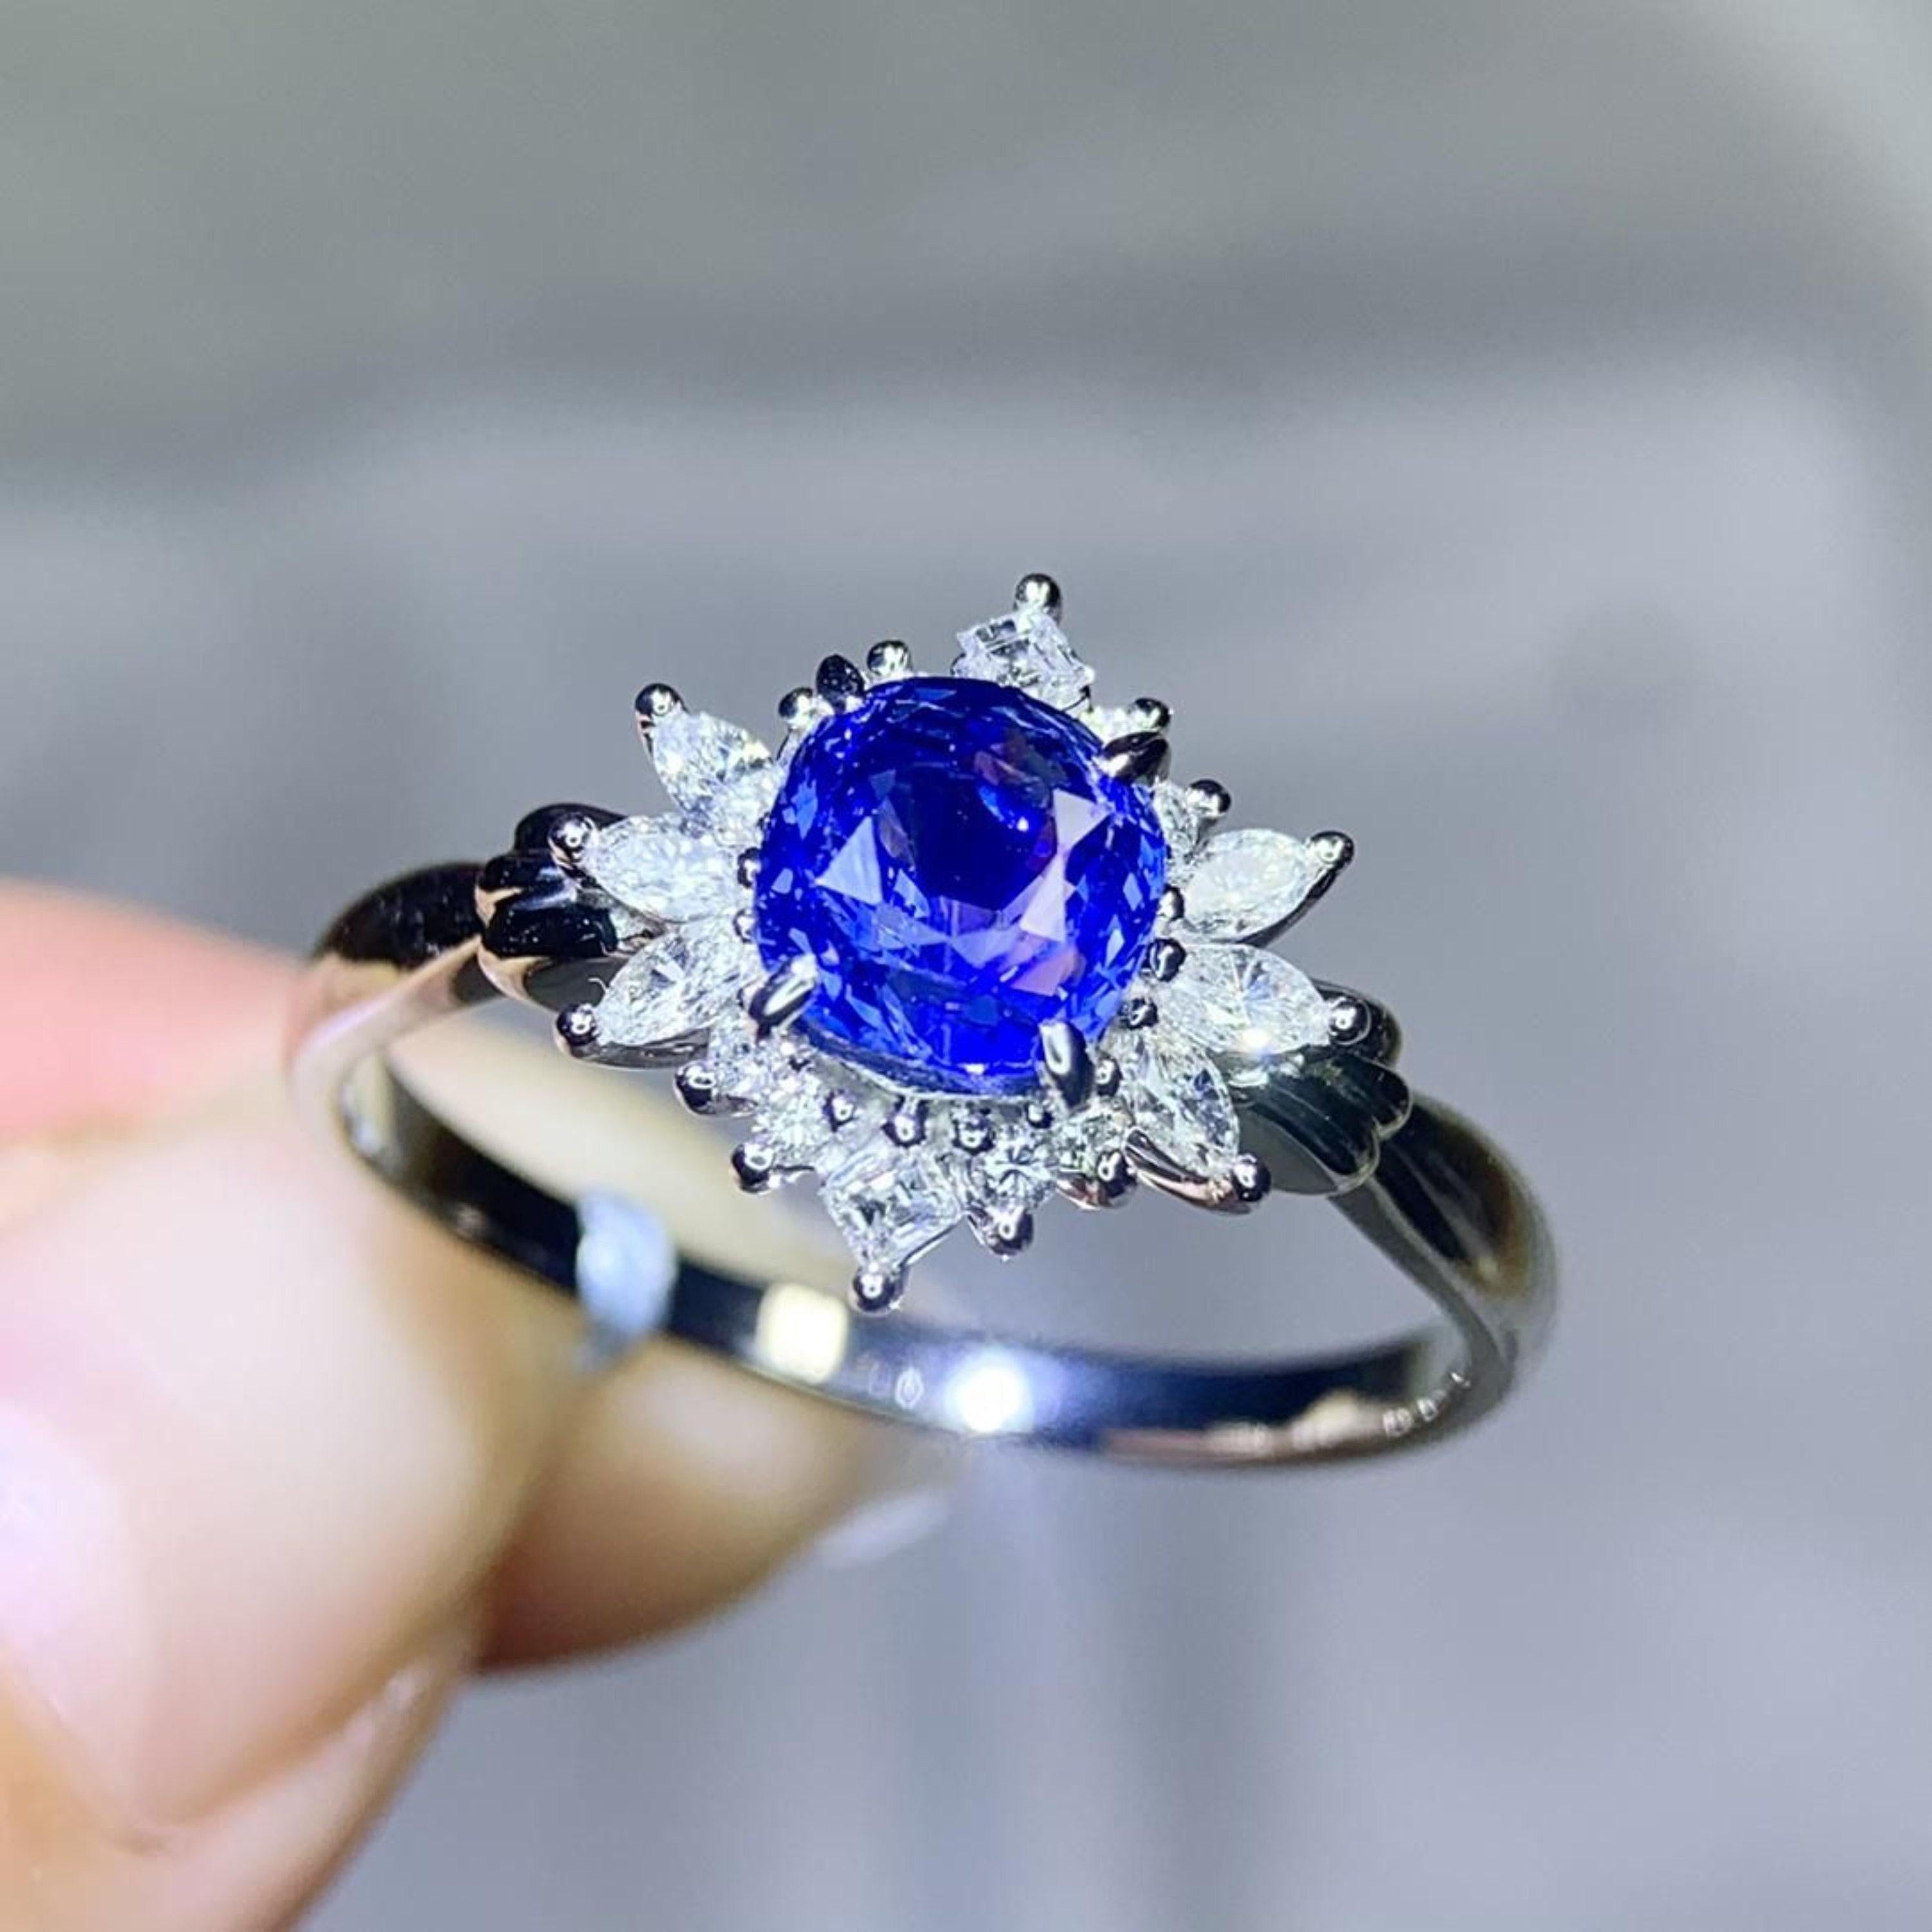 For Sale:  Vintage Sapphire Engagement Ring, Antique Natural Sapphire Wedding Ring 3